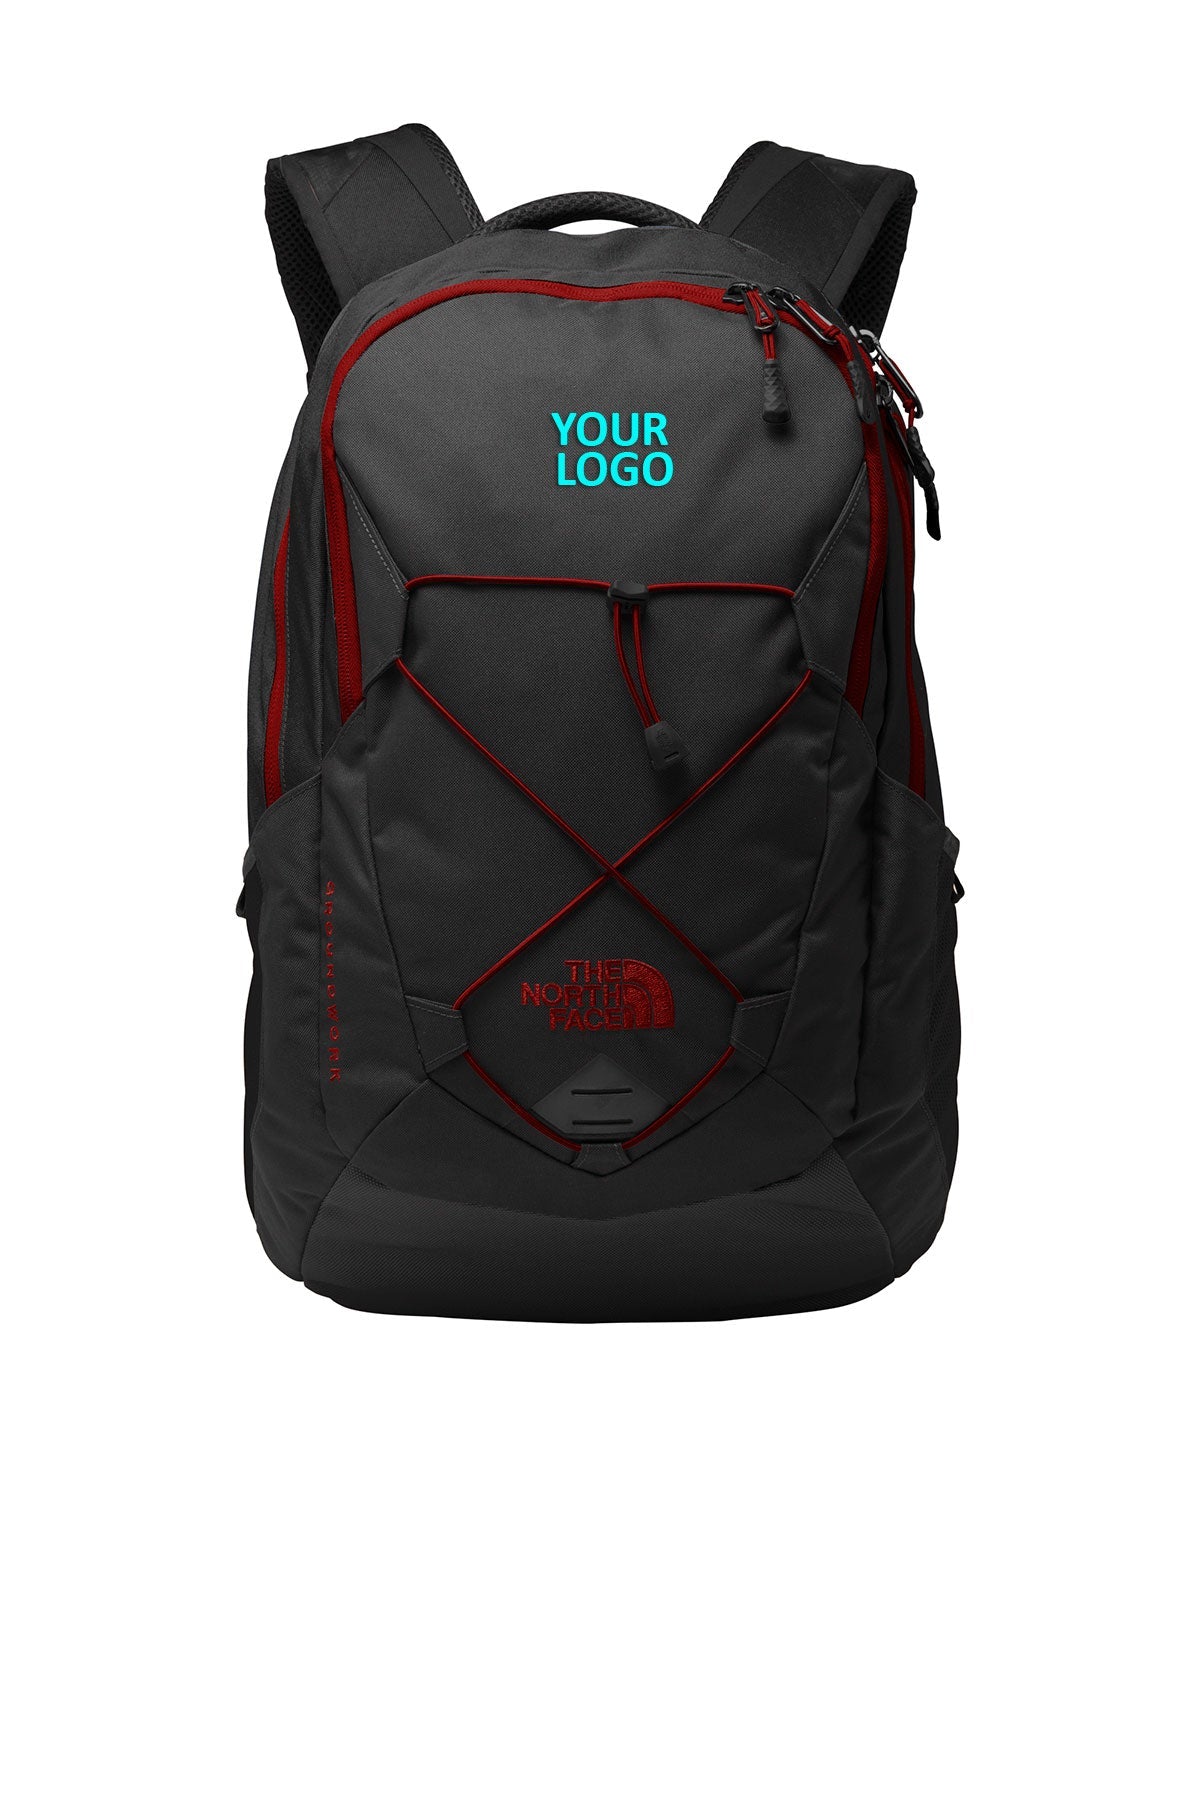 the north face groundwork backpack nf0a3kx6 tnf dark grey heather cardinal red